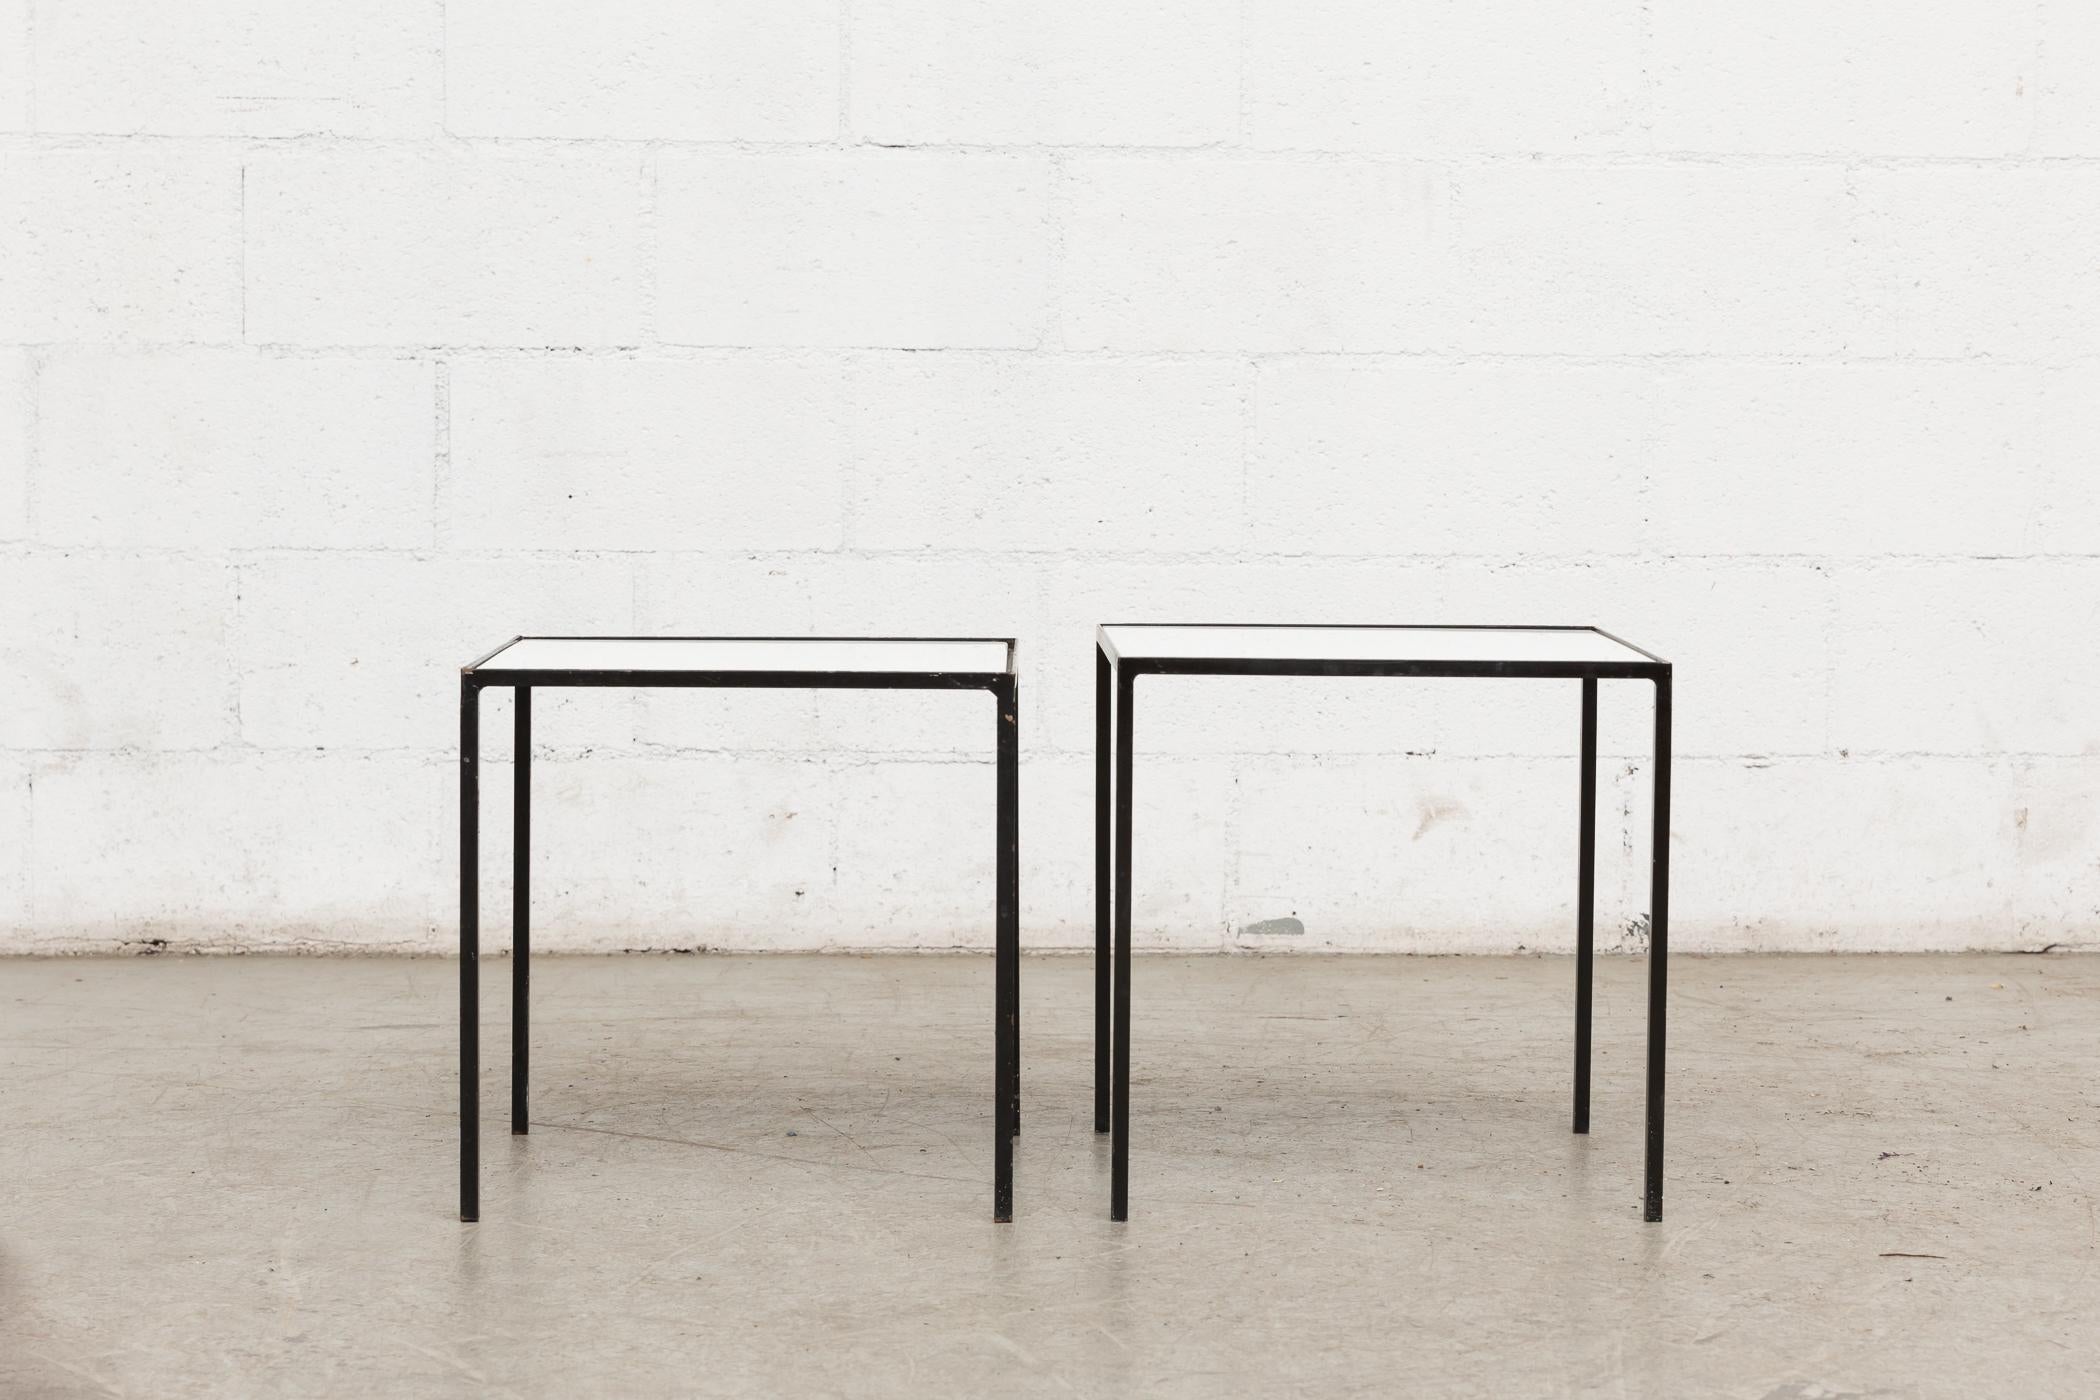 Almost identical Artimeta white glass side tables with black enameled metal frames. Both in original condition. Sold separately. First measures: 15.75 x 15.75 x 16
Second measures: 16 x 16 x 16.24.